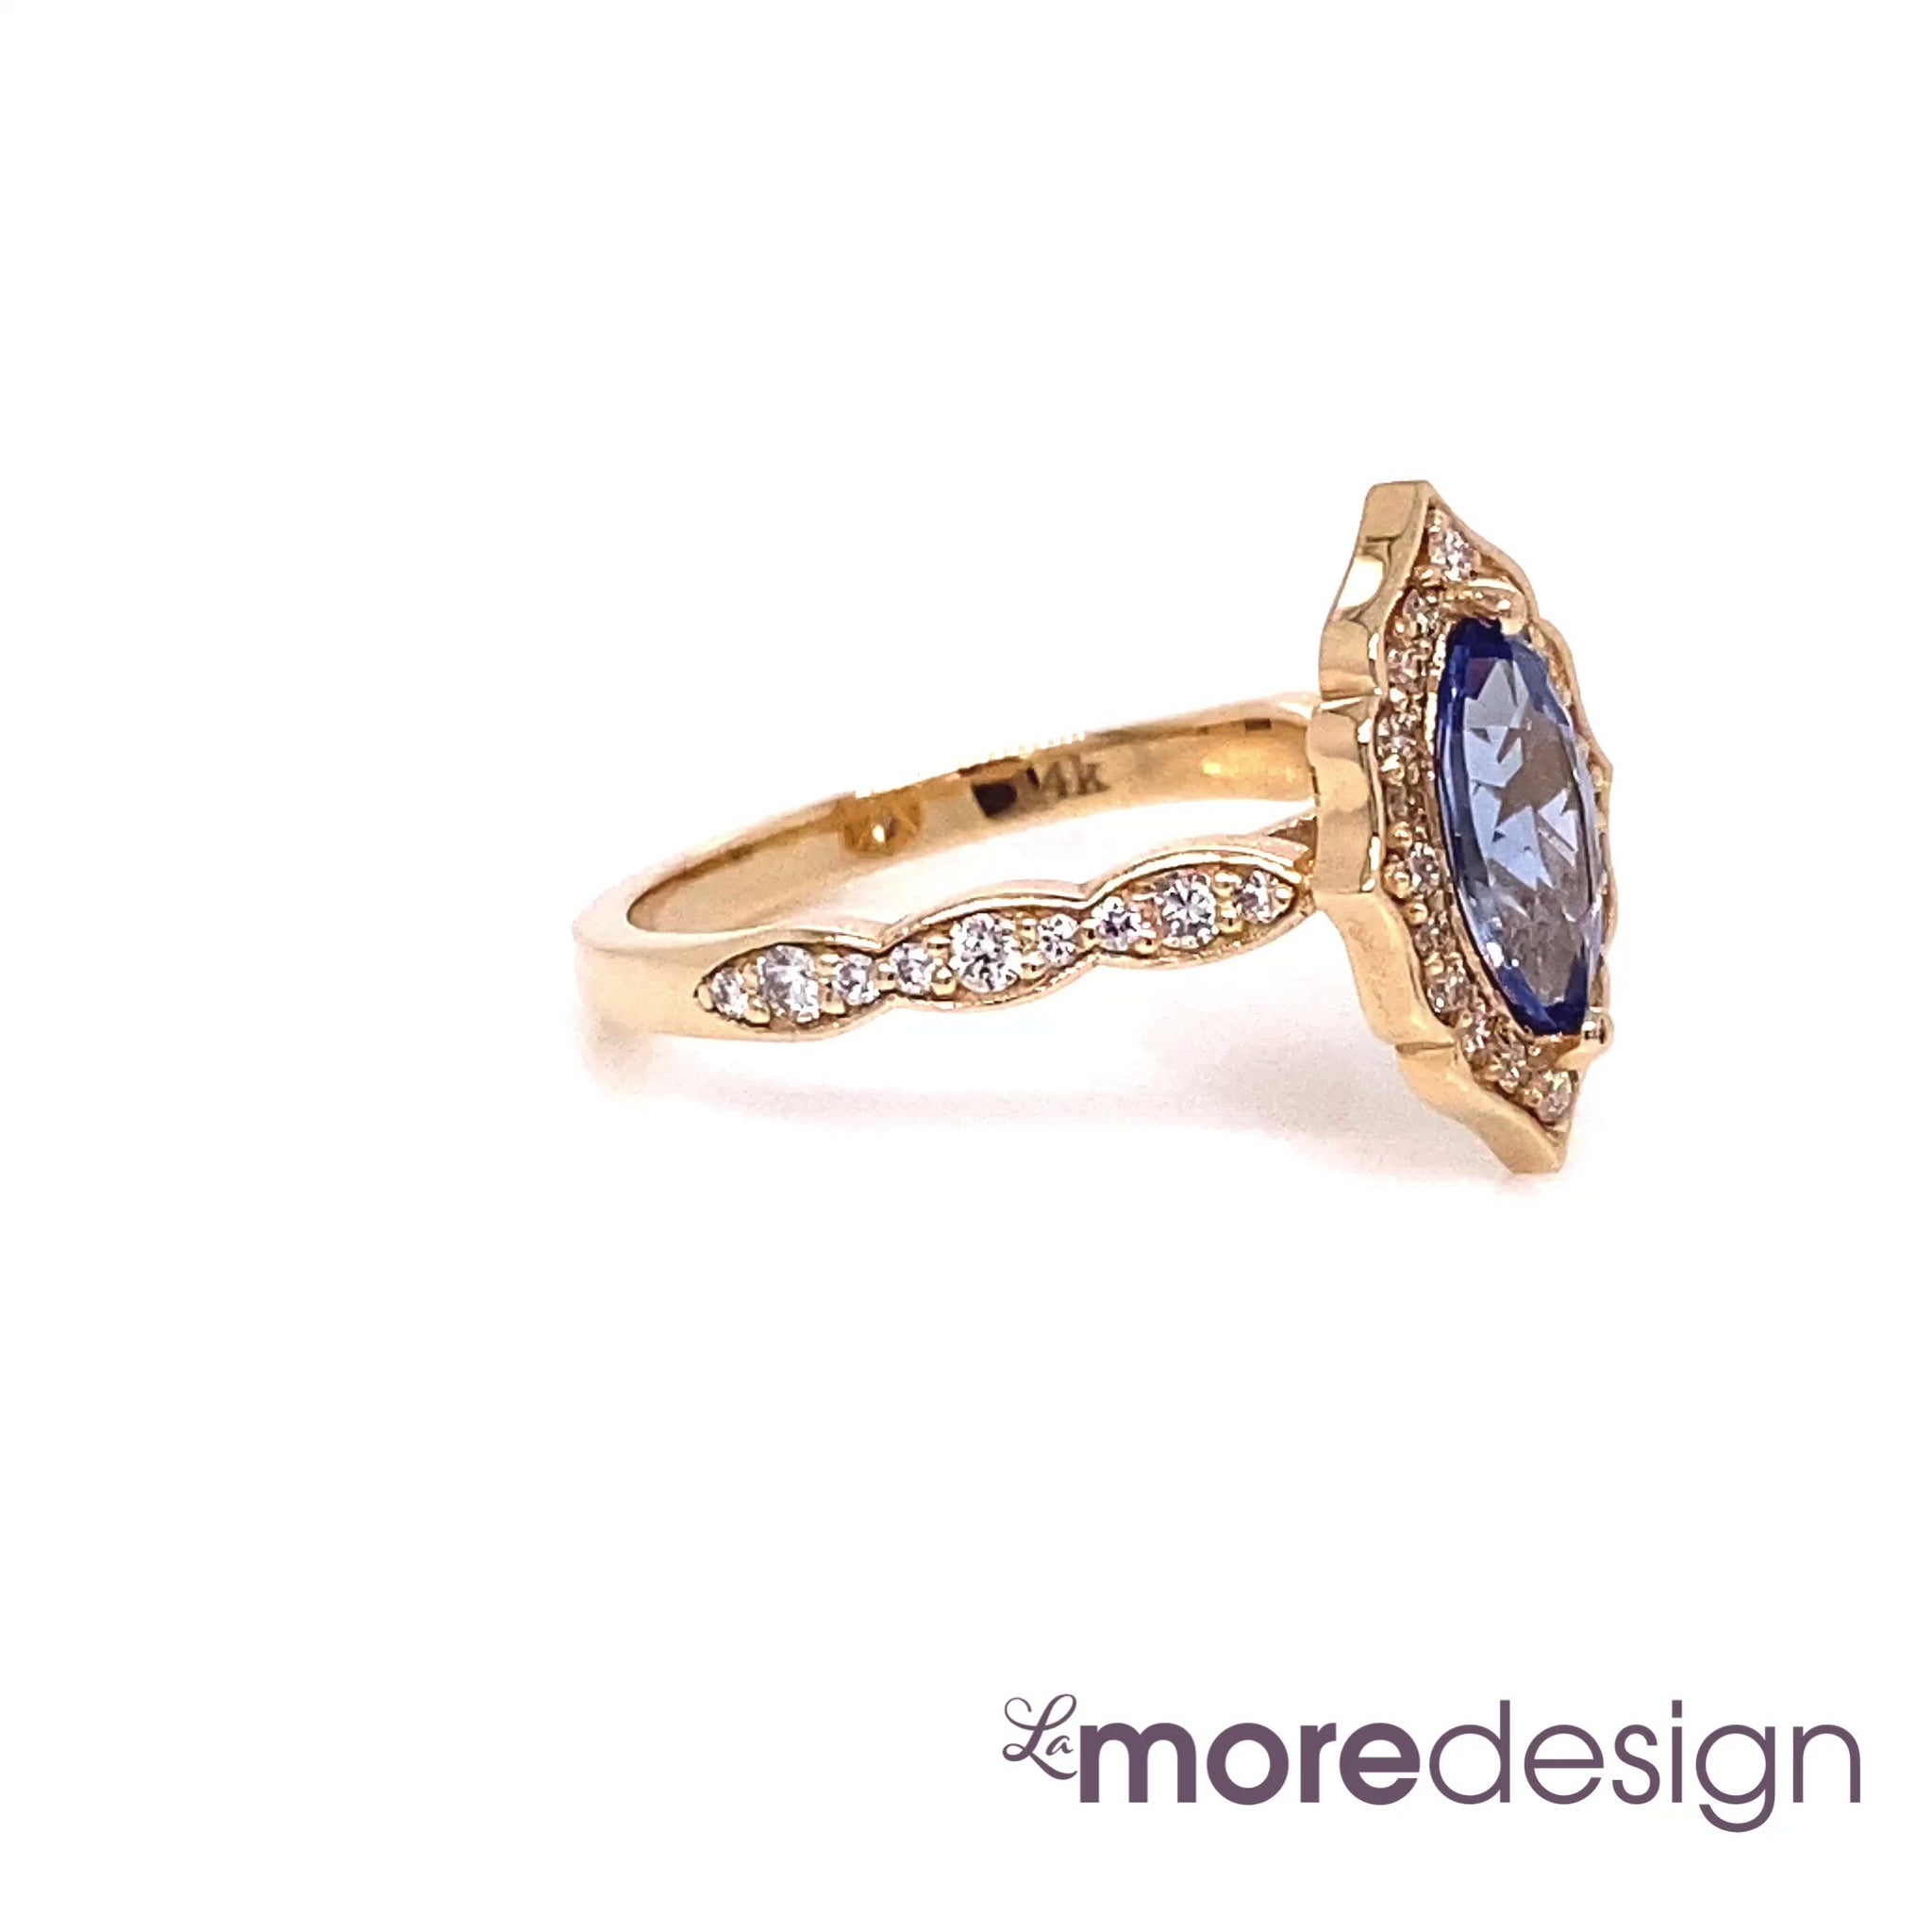 Stunning unique and gorgeous creation! This blue sapphire engagement ring is crafted in 14k yellow gold vintage floral diamond ring setting with a 1.03-carat marquise cut natural sapphire center ~ total gemstone and diamond weight of the whole ring is 1.39 ct.tw.  This elegant vintage-inspired marquise-cut engagement ring will guarantee a big smile on your future bride's face! All our wedding bands can pair beautifully with this beautiful vintage floral diamond sapphire ring!